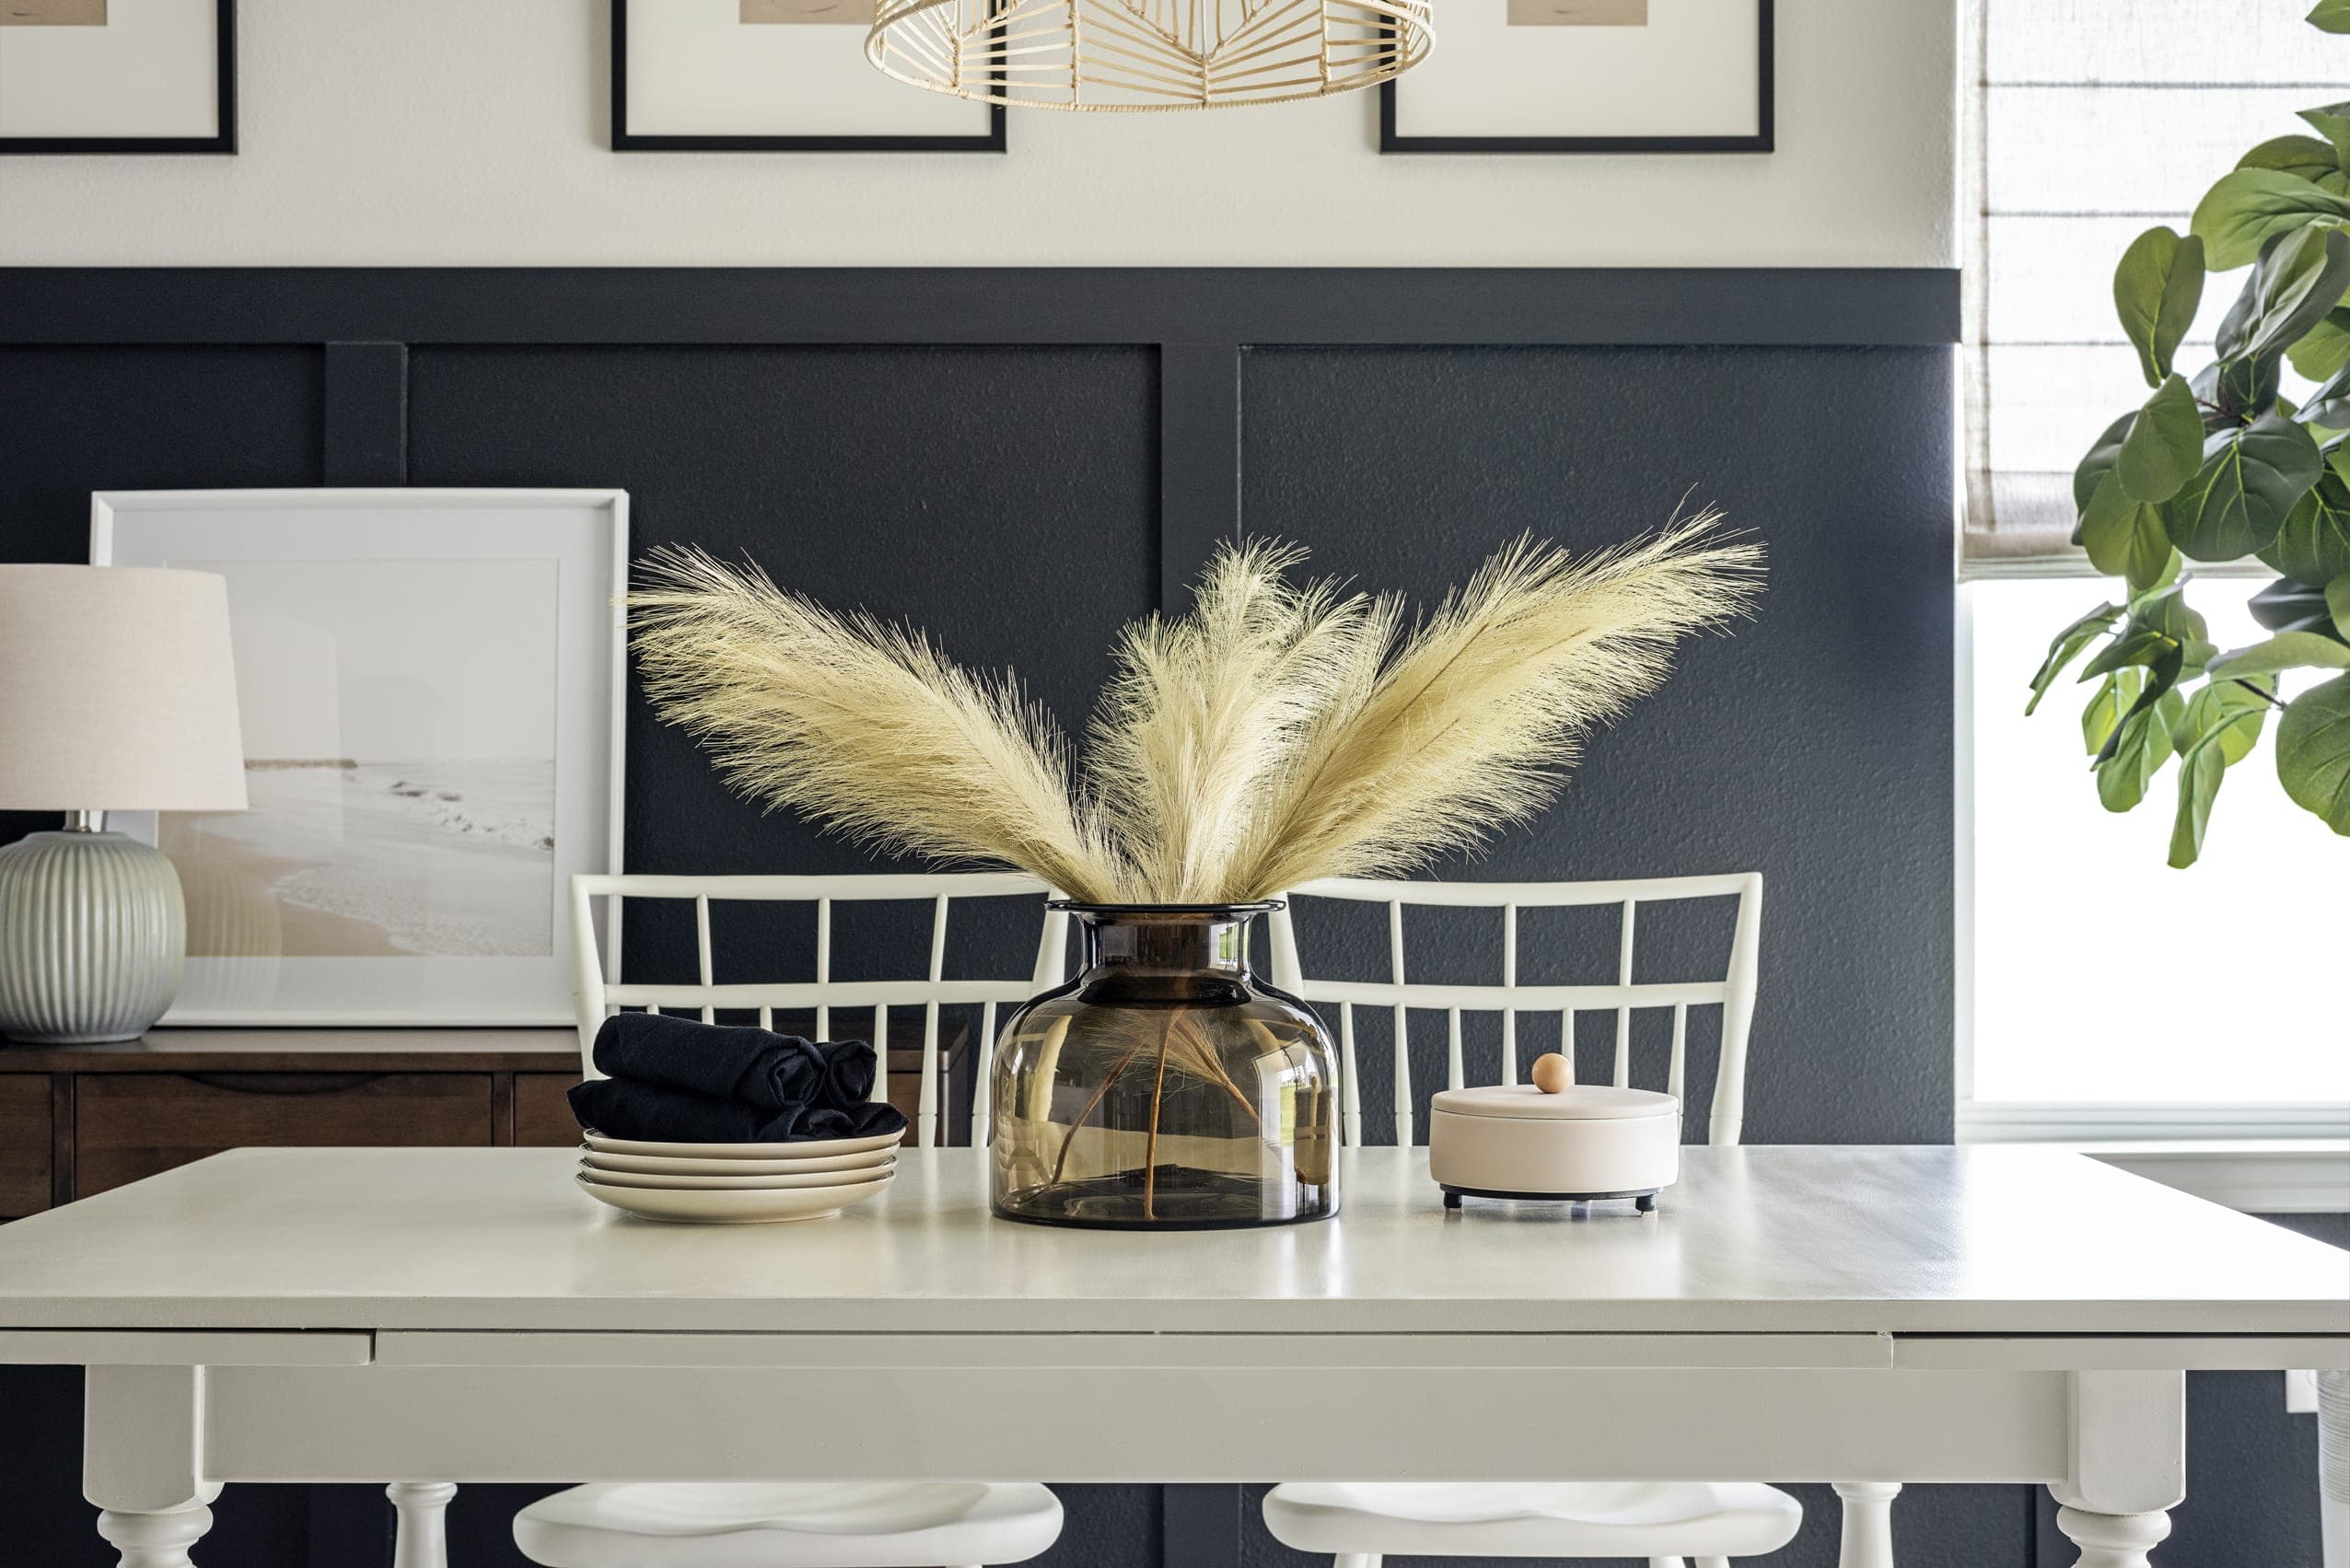 White Dining Table Feathers In Dark Glass Vase Dark Blue Wainscoting